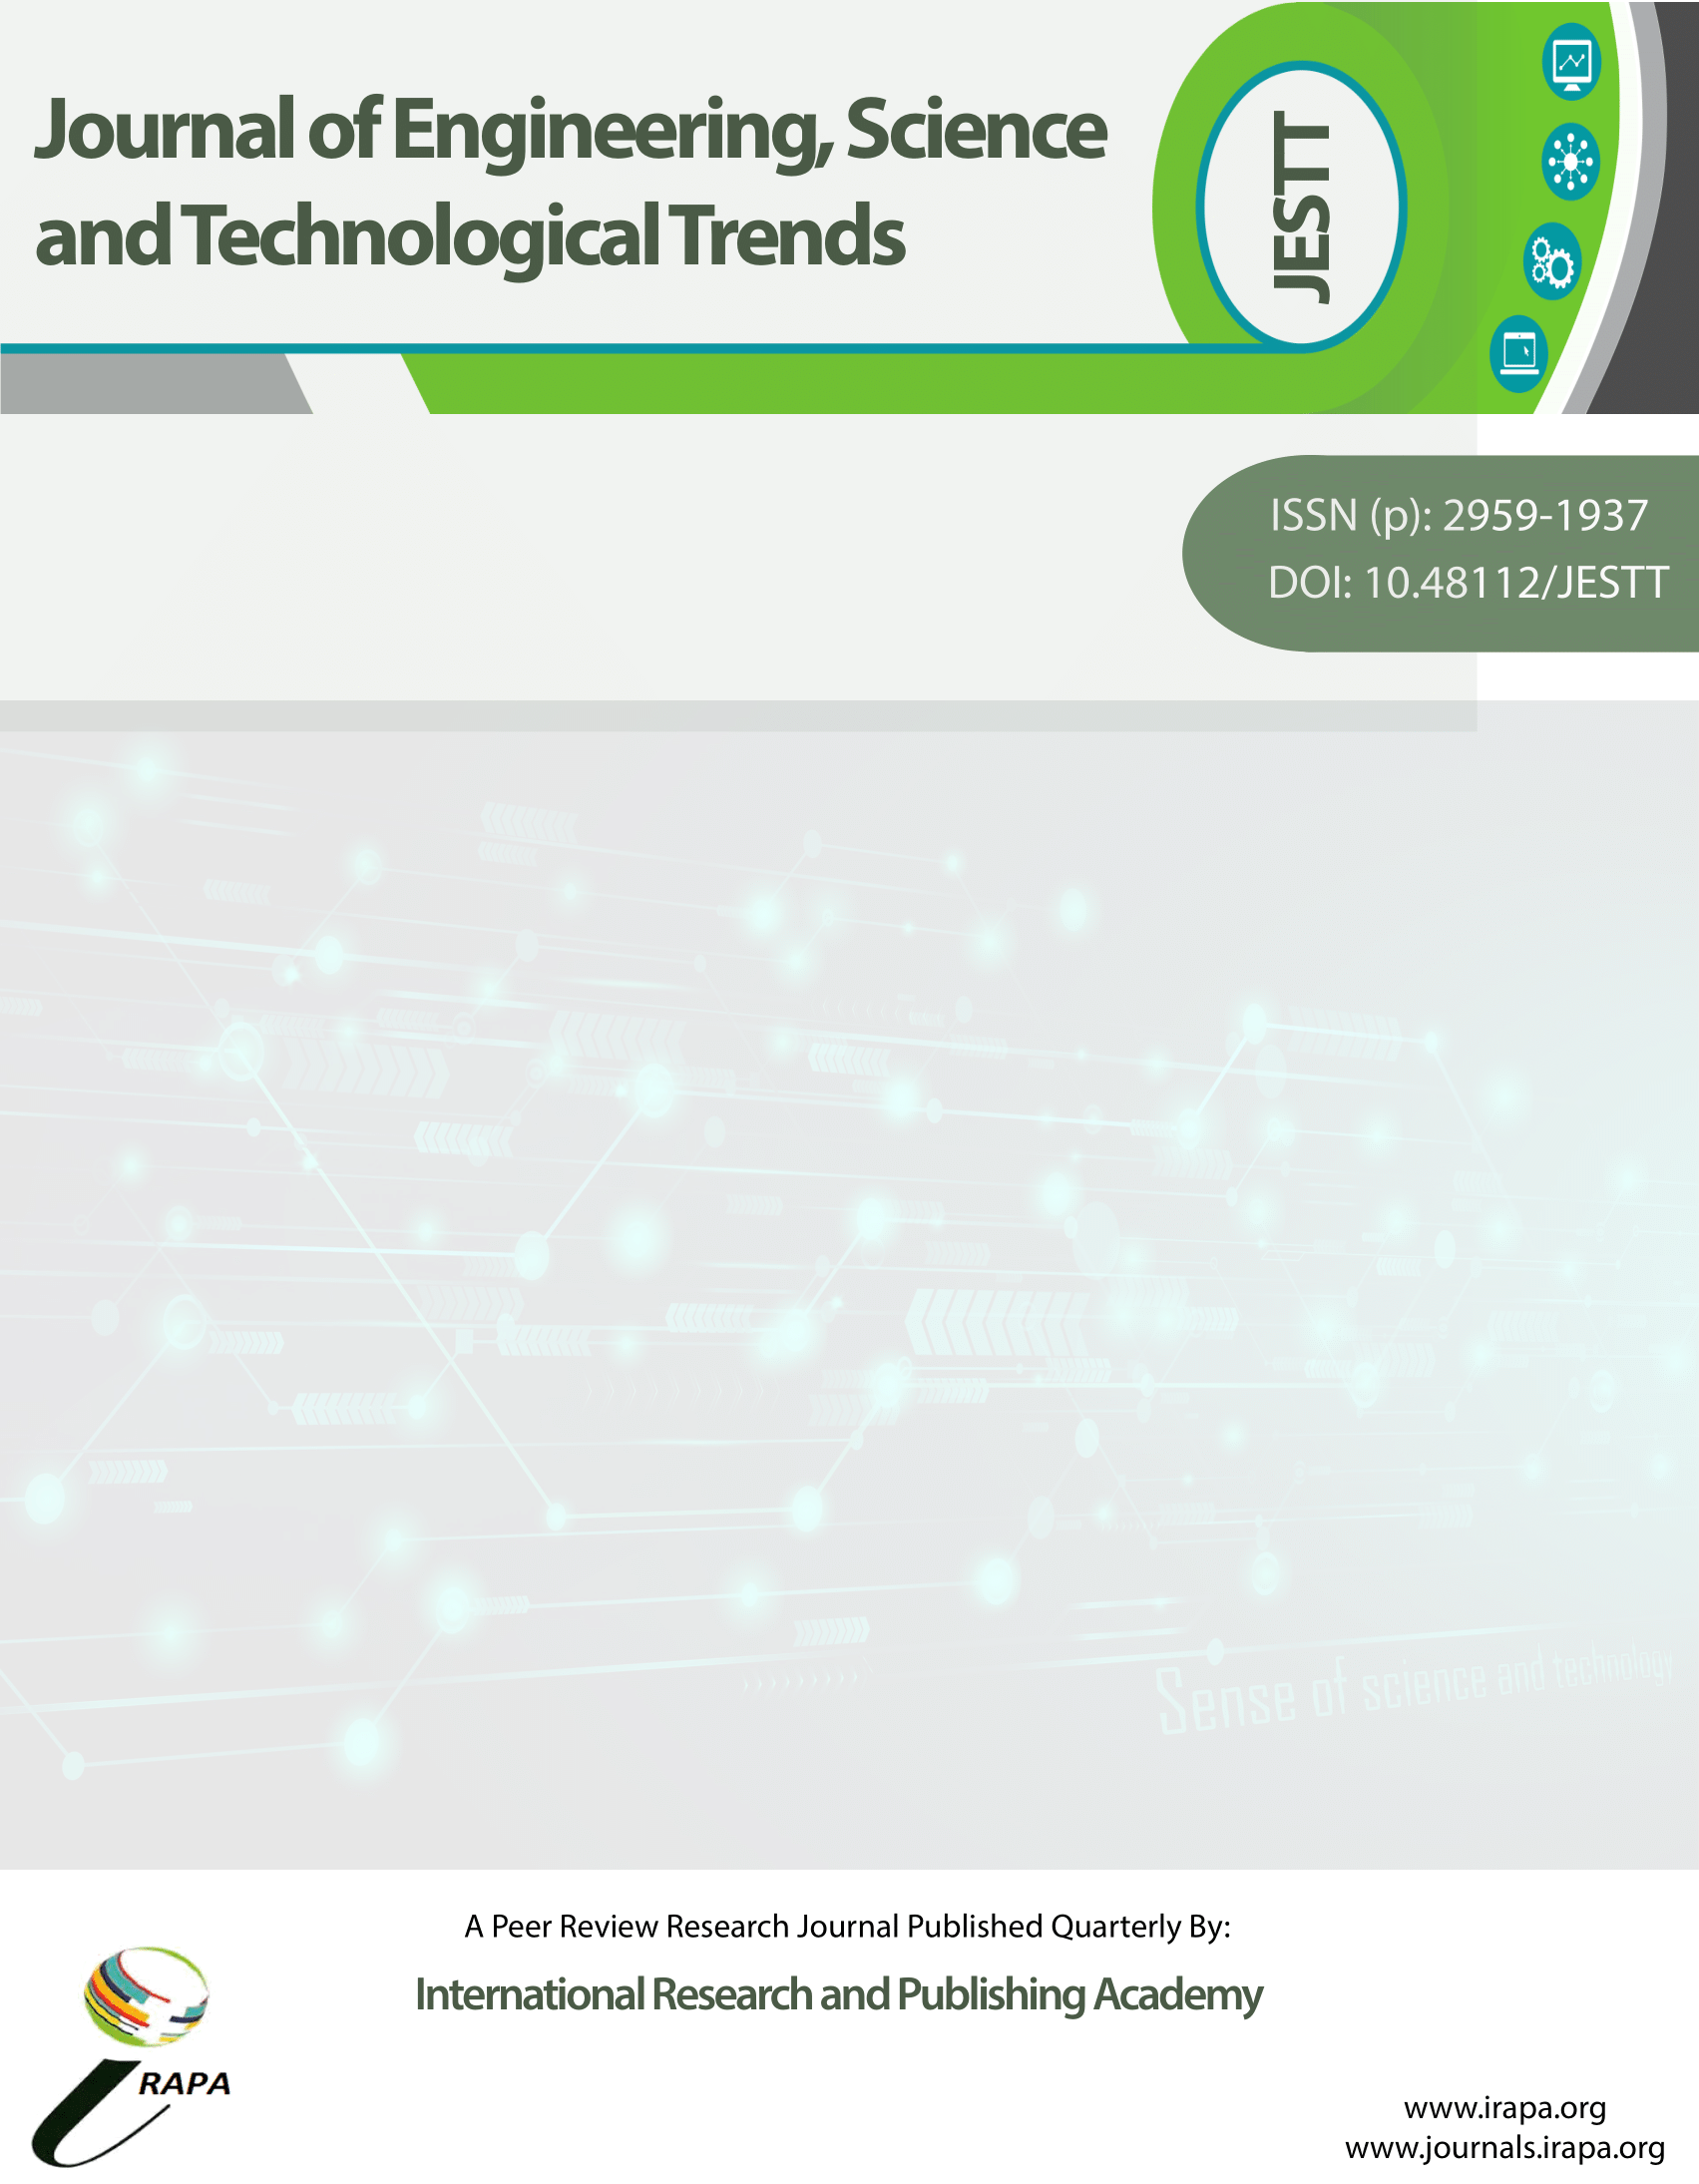 Journal of Engineering, Science and Technological Trends